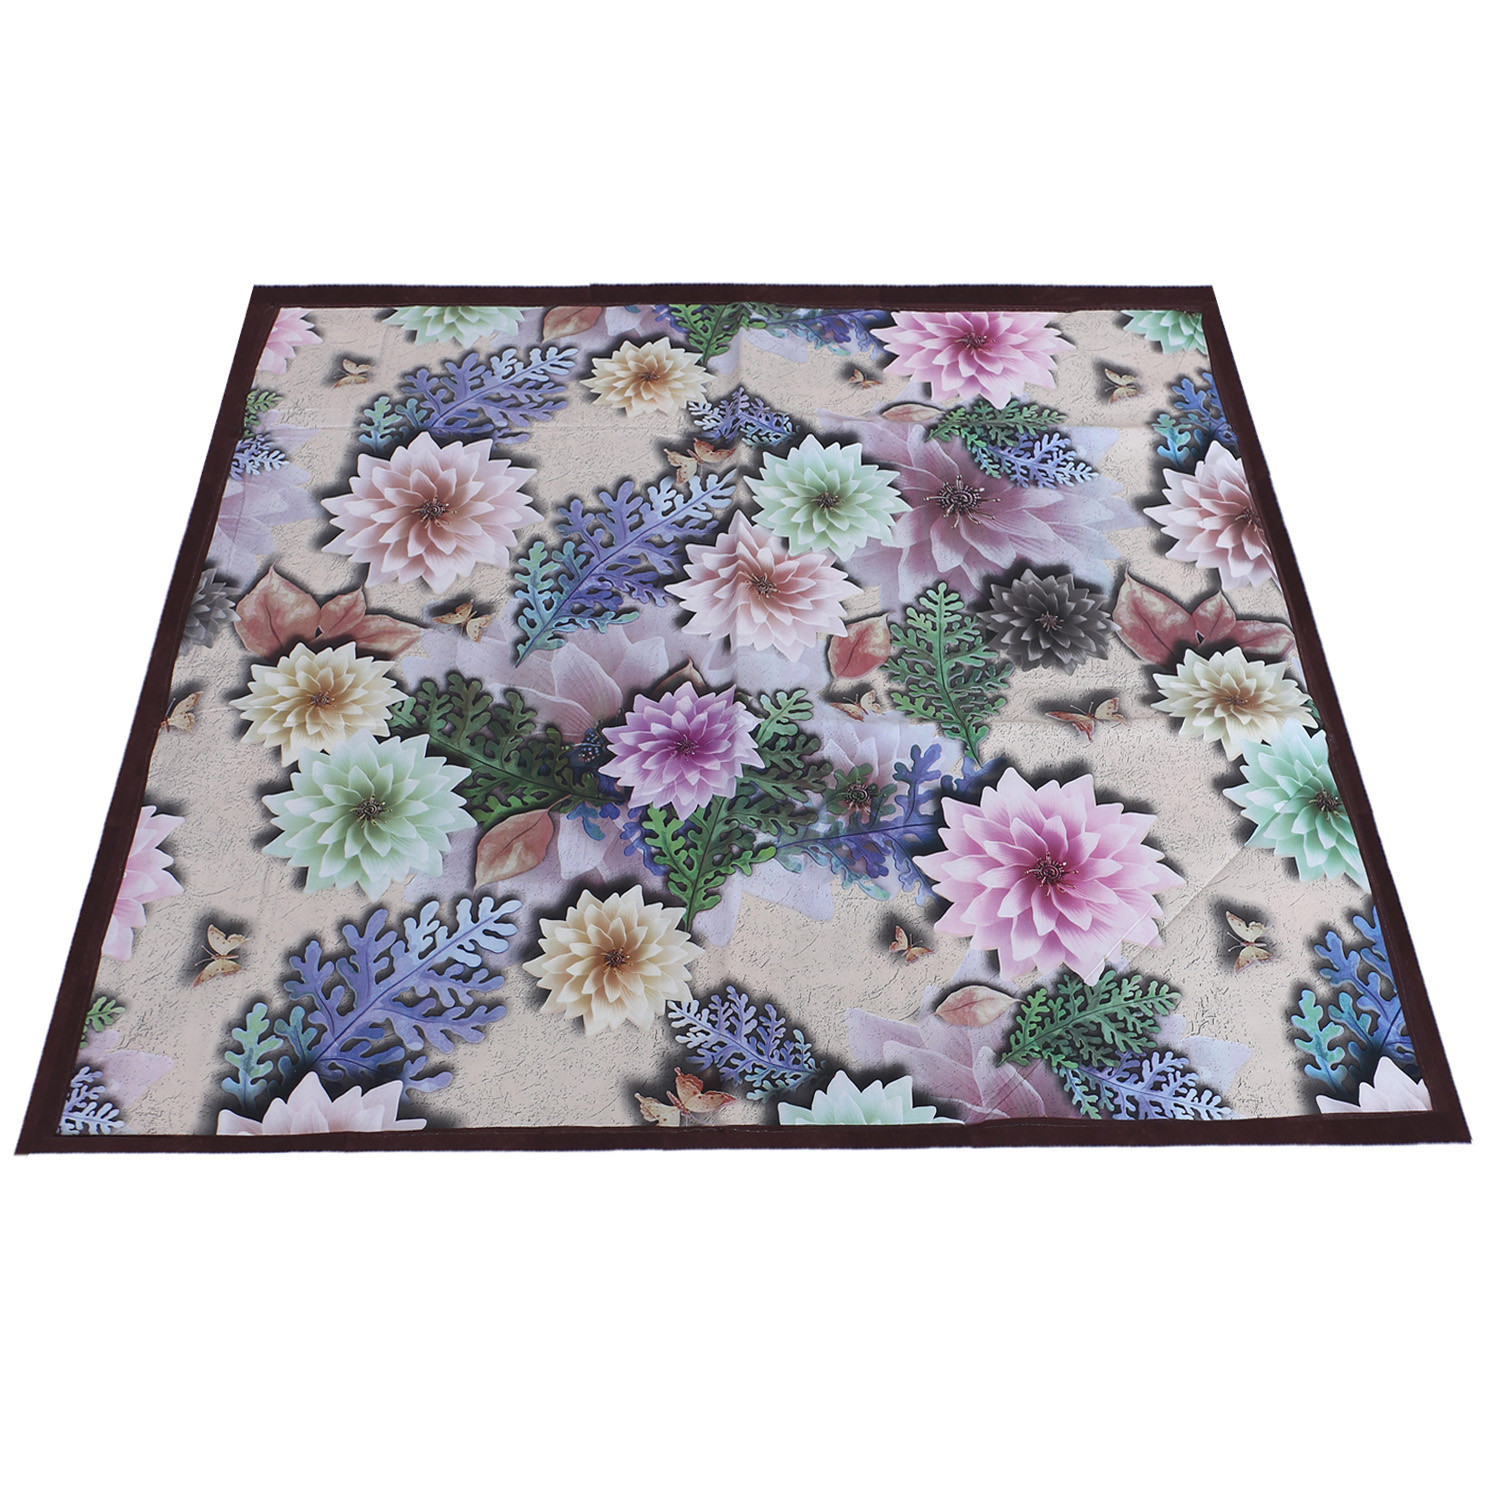 Kuber Industries Bed Server|PVC Rose Floral & Buterfly Print Both Sided Food Mat|Waterproof Mattress Protector, 35x35 Inch (Multicolor)